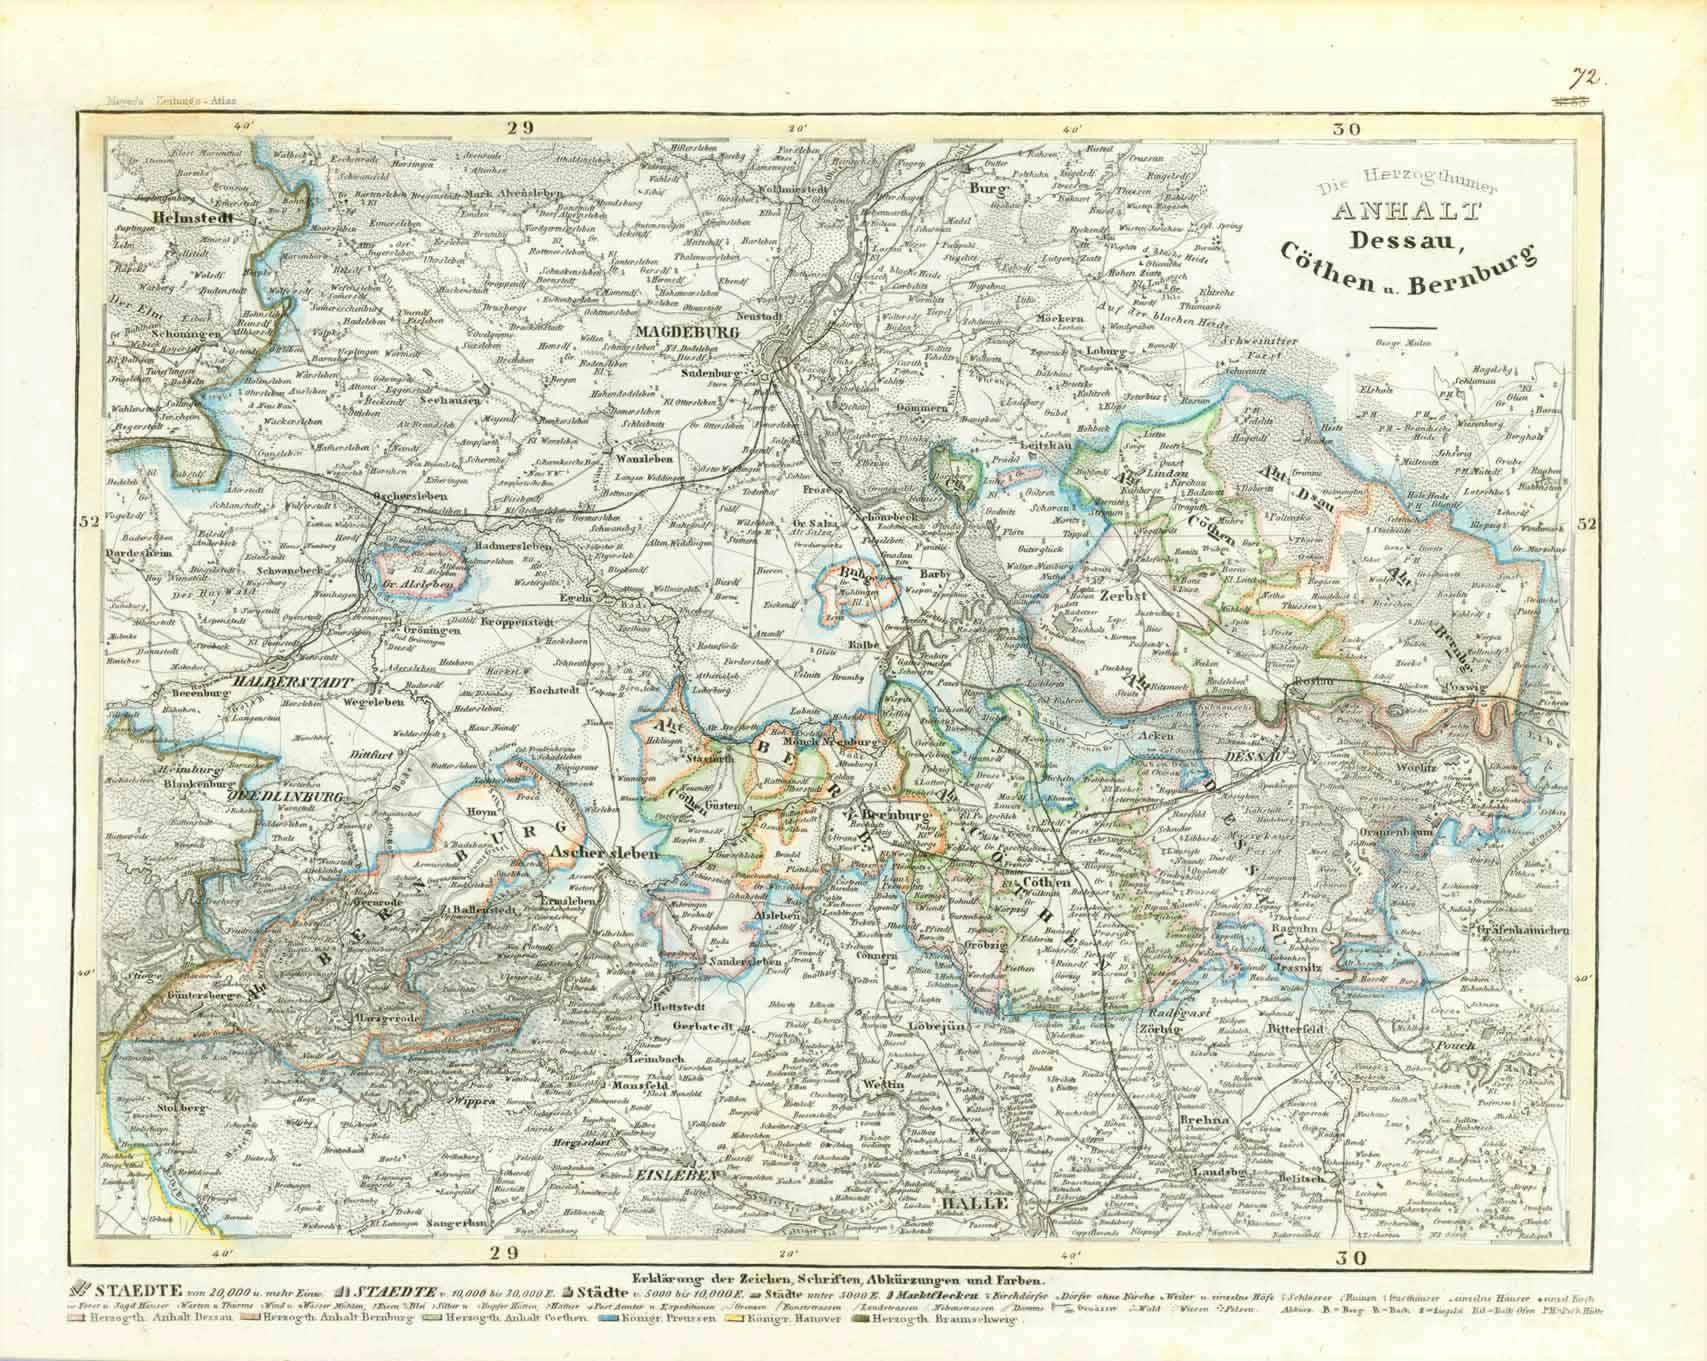 "Die Herzogthuemer Anhalt, Dessau, Coethen u. Bernburg." Steel etching from "Neuster Zeitungs Atlas. Alter und Neuer Erdkunde" by J. Meyer, ca 1855. Original outline coloring.  This map reaches from Helmstedt and Burg in the north corners as far south as Eisleben and Halle in the south-central area. In the center is Kroppenstedt and Egeln. On the right side is Woerlitz and Grafenhainchen.